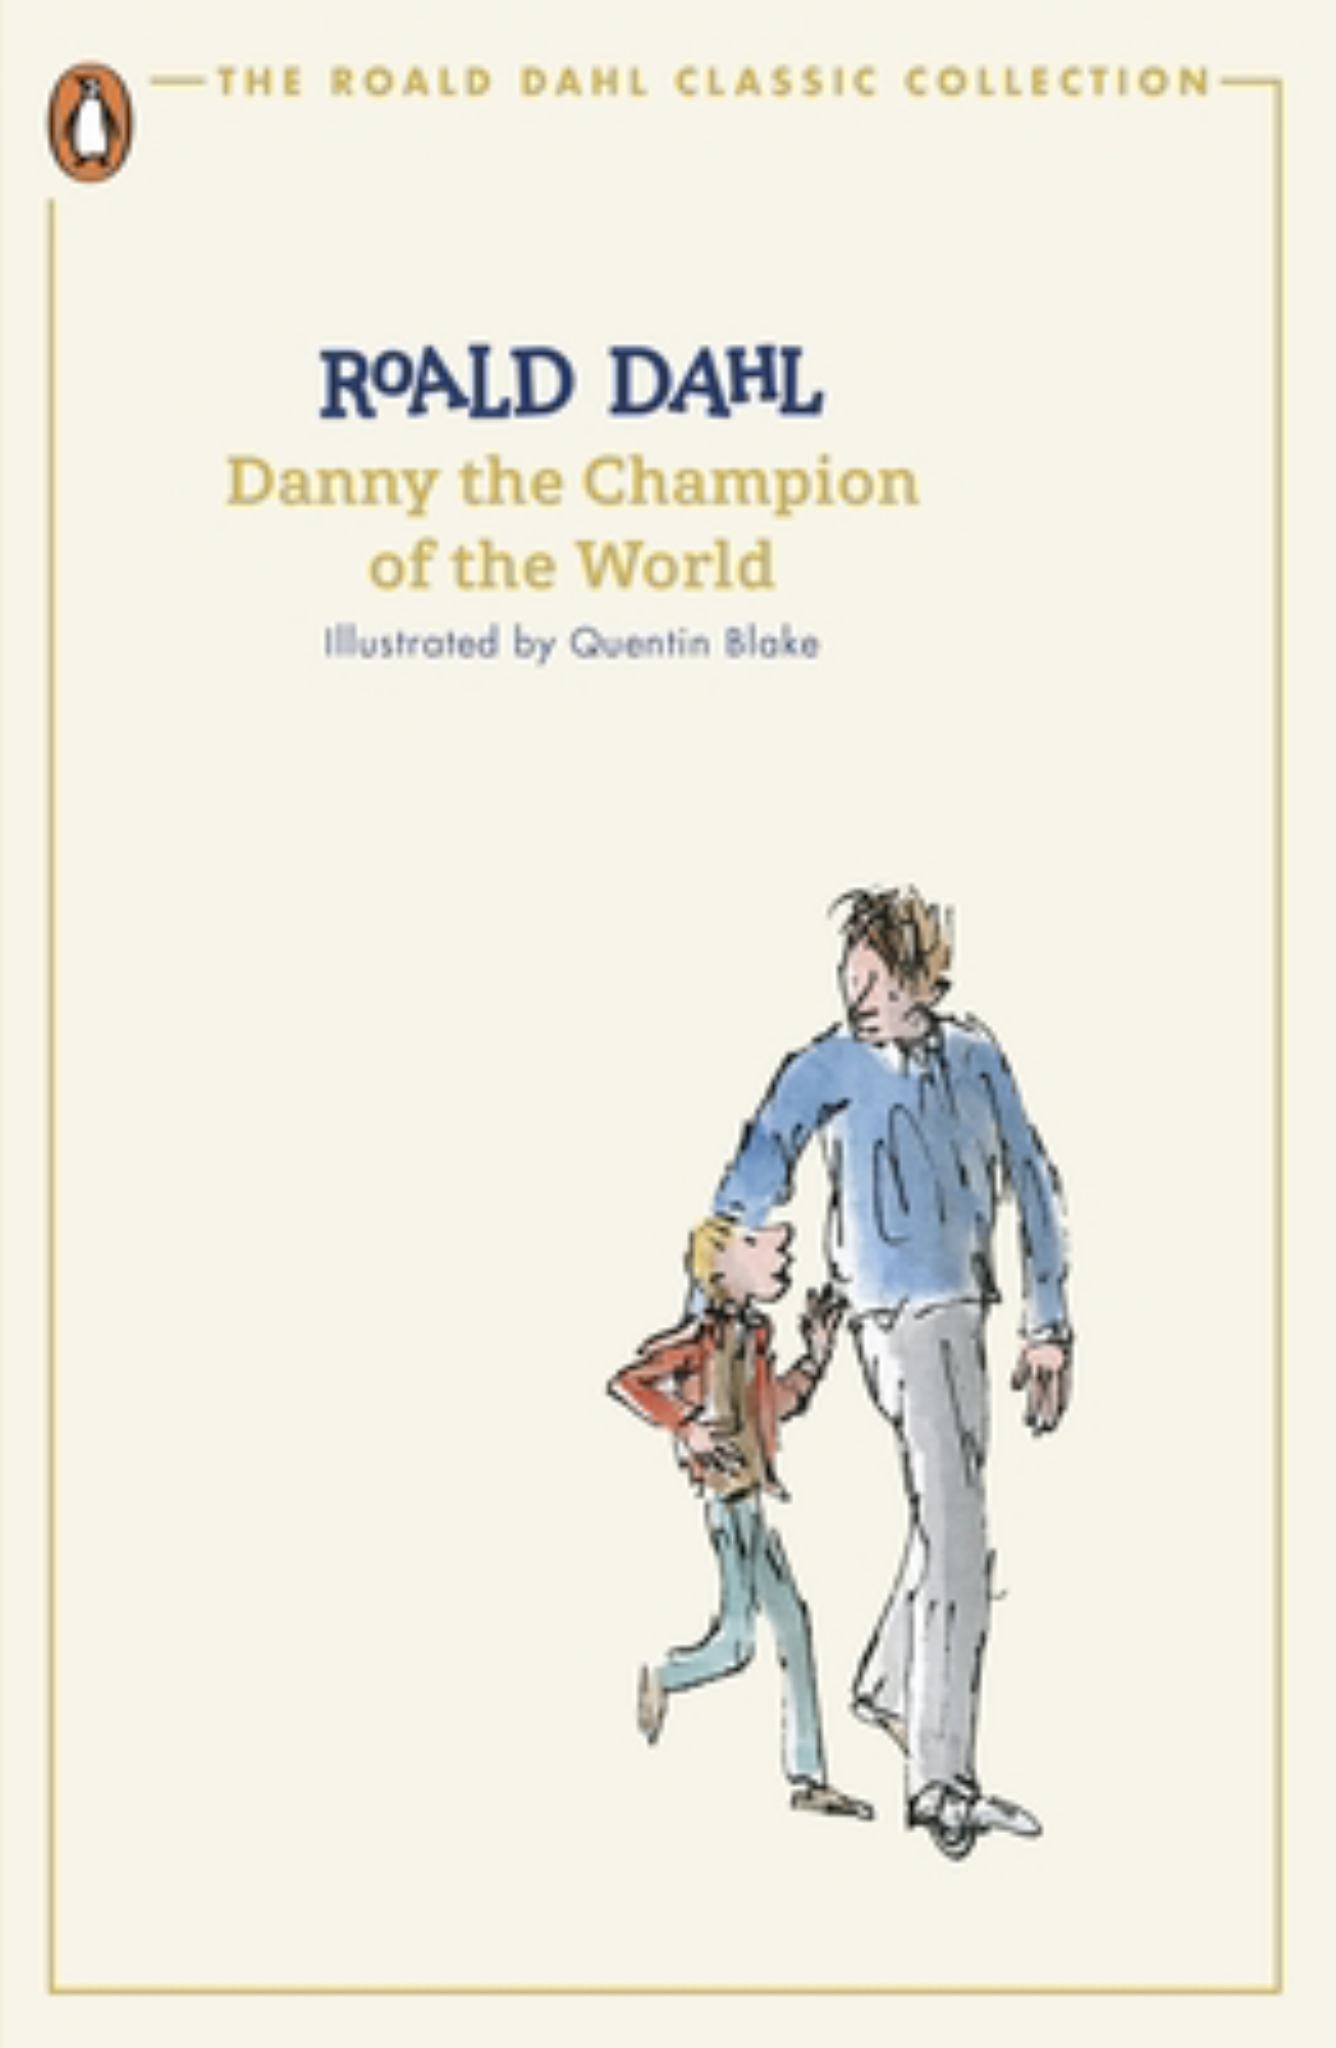 Danny The Champion Of The World: Penguin Classic Collection